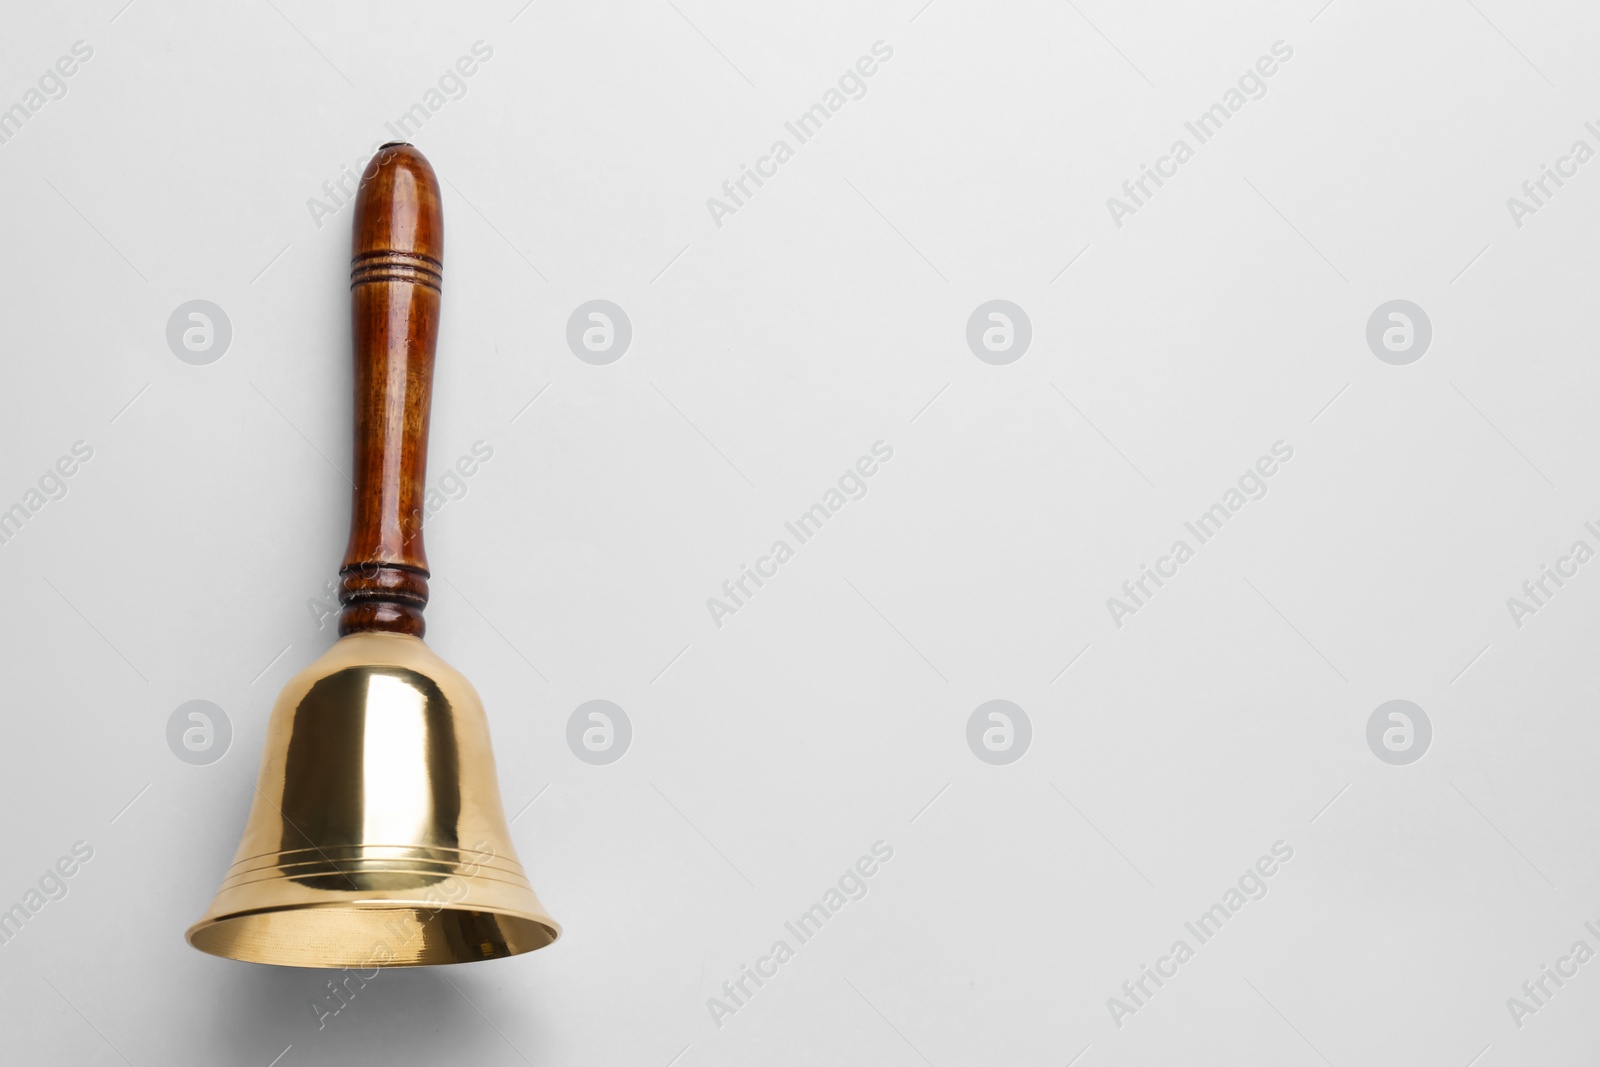 Photo of Golden school bell with wooden handle on grey background, top view. Space for text